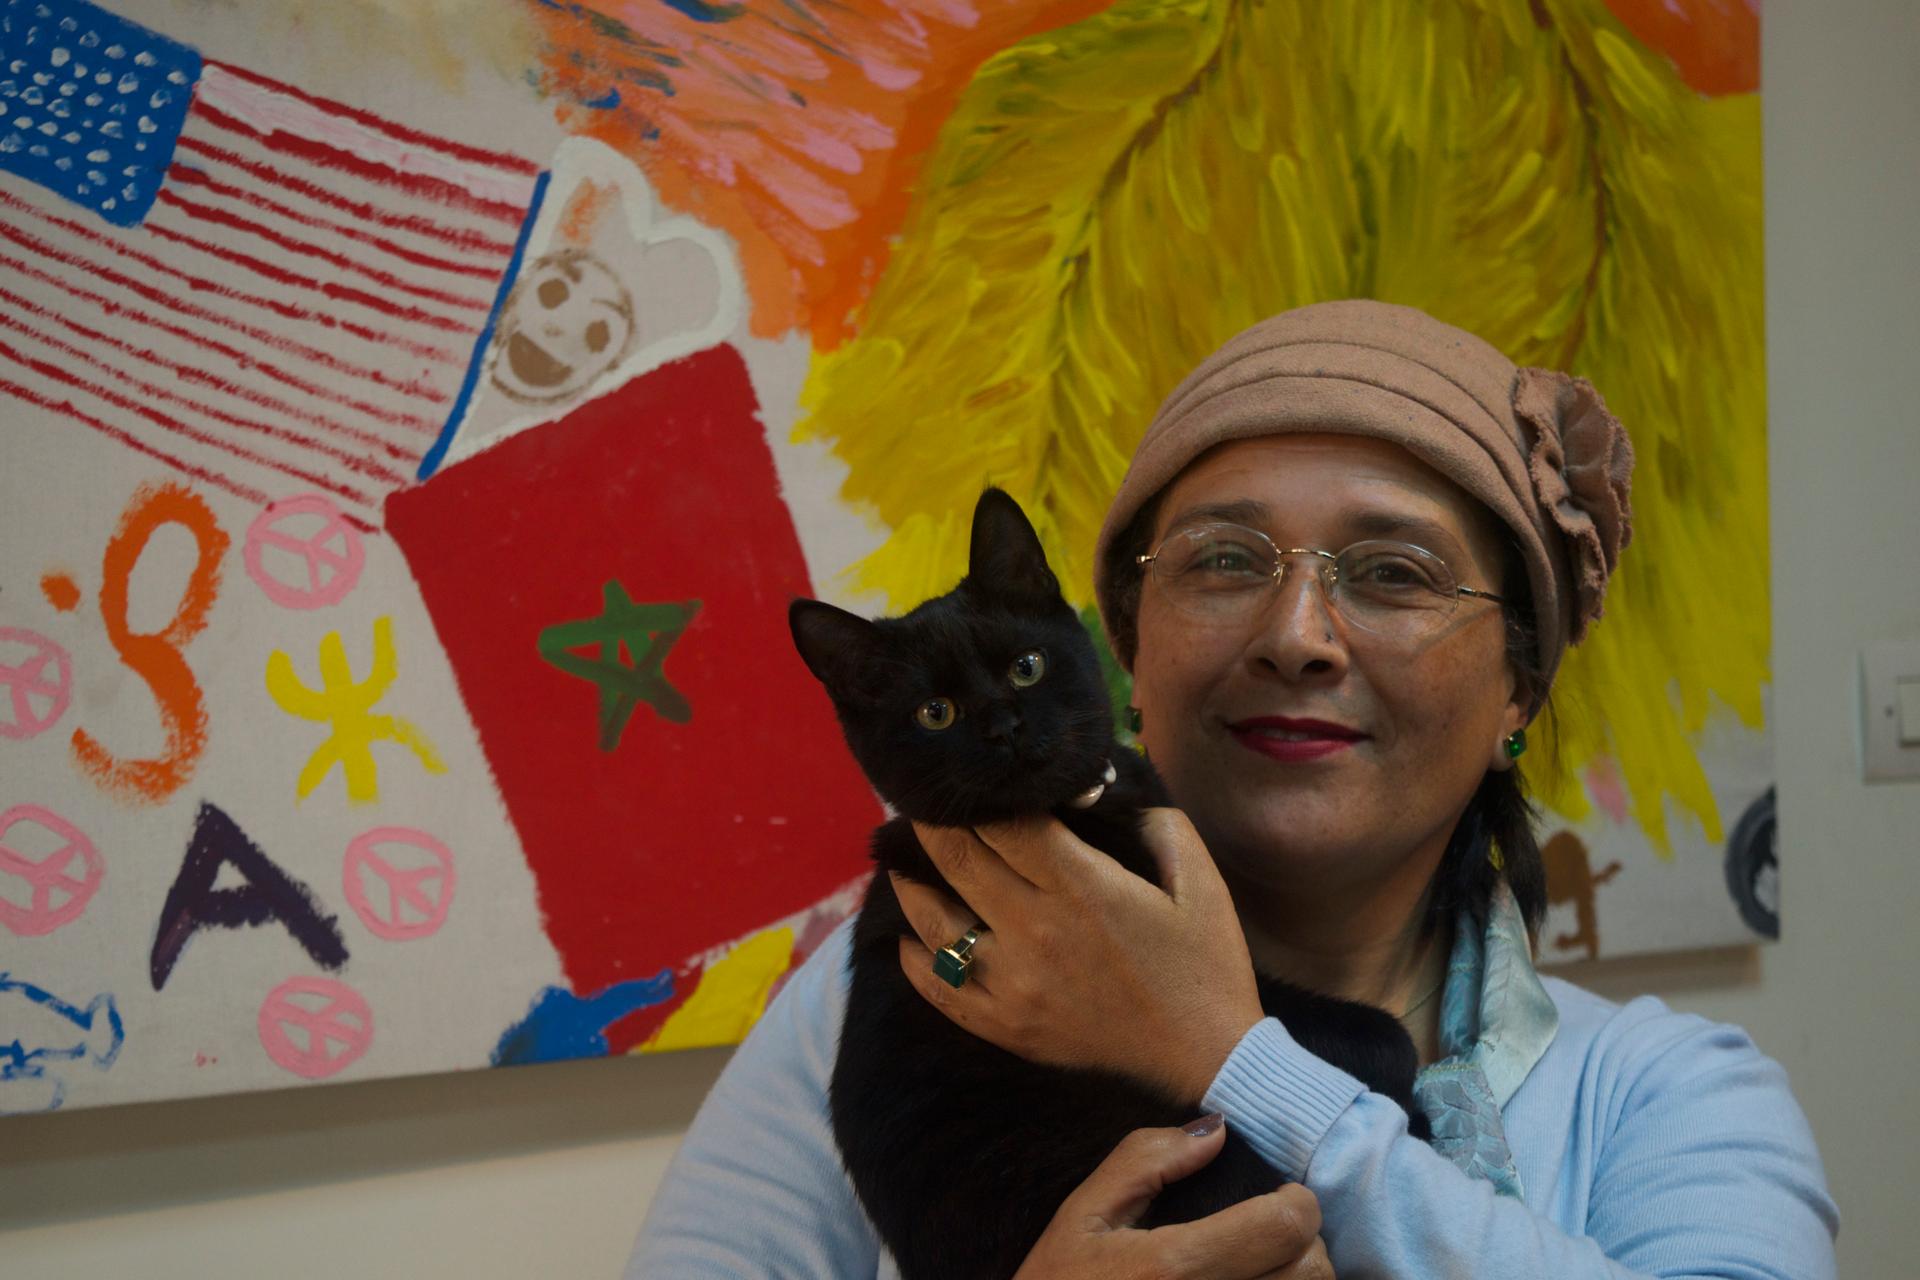 Jamila Bargach and he cute cat in front of a mural